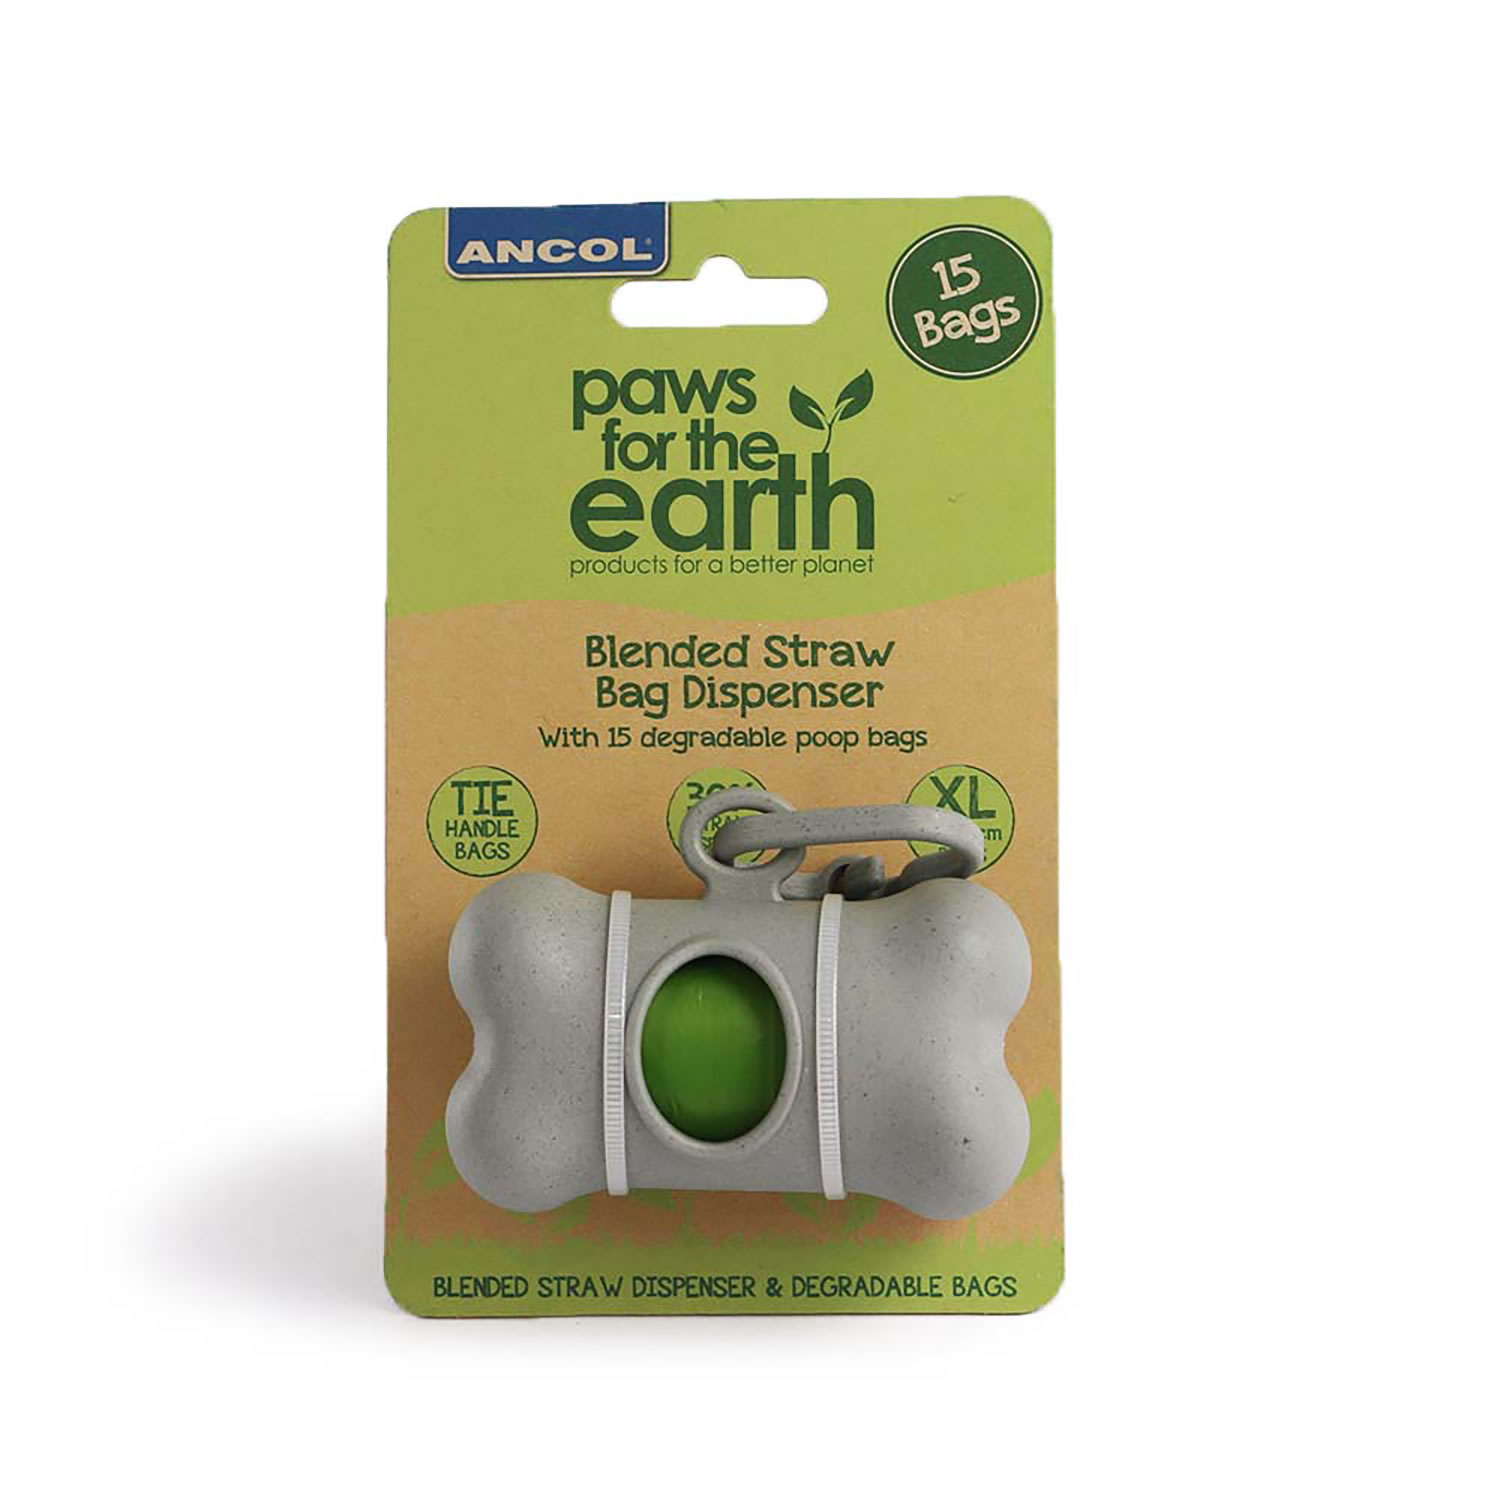 ANCOL PAWS FOR THE EARTH POOP BAG DISPENSER 1 X 15 BAGS